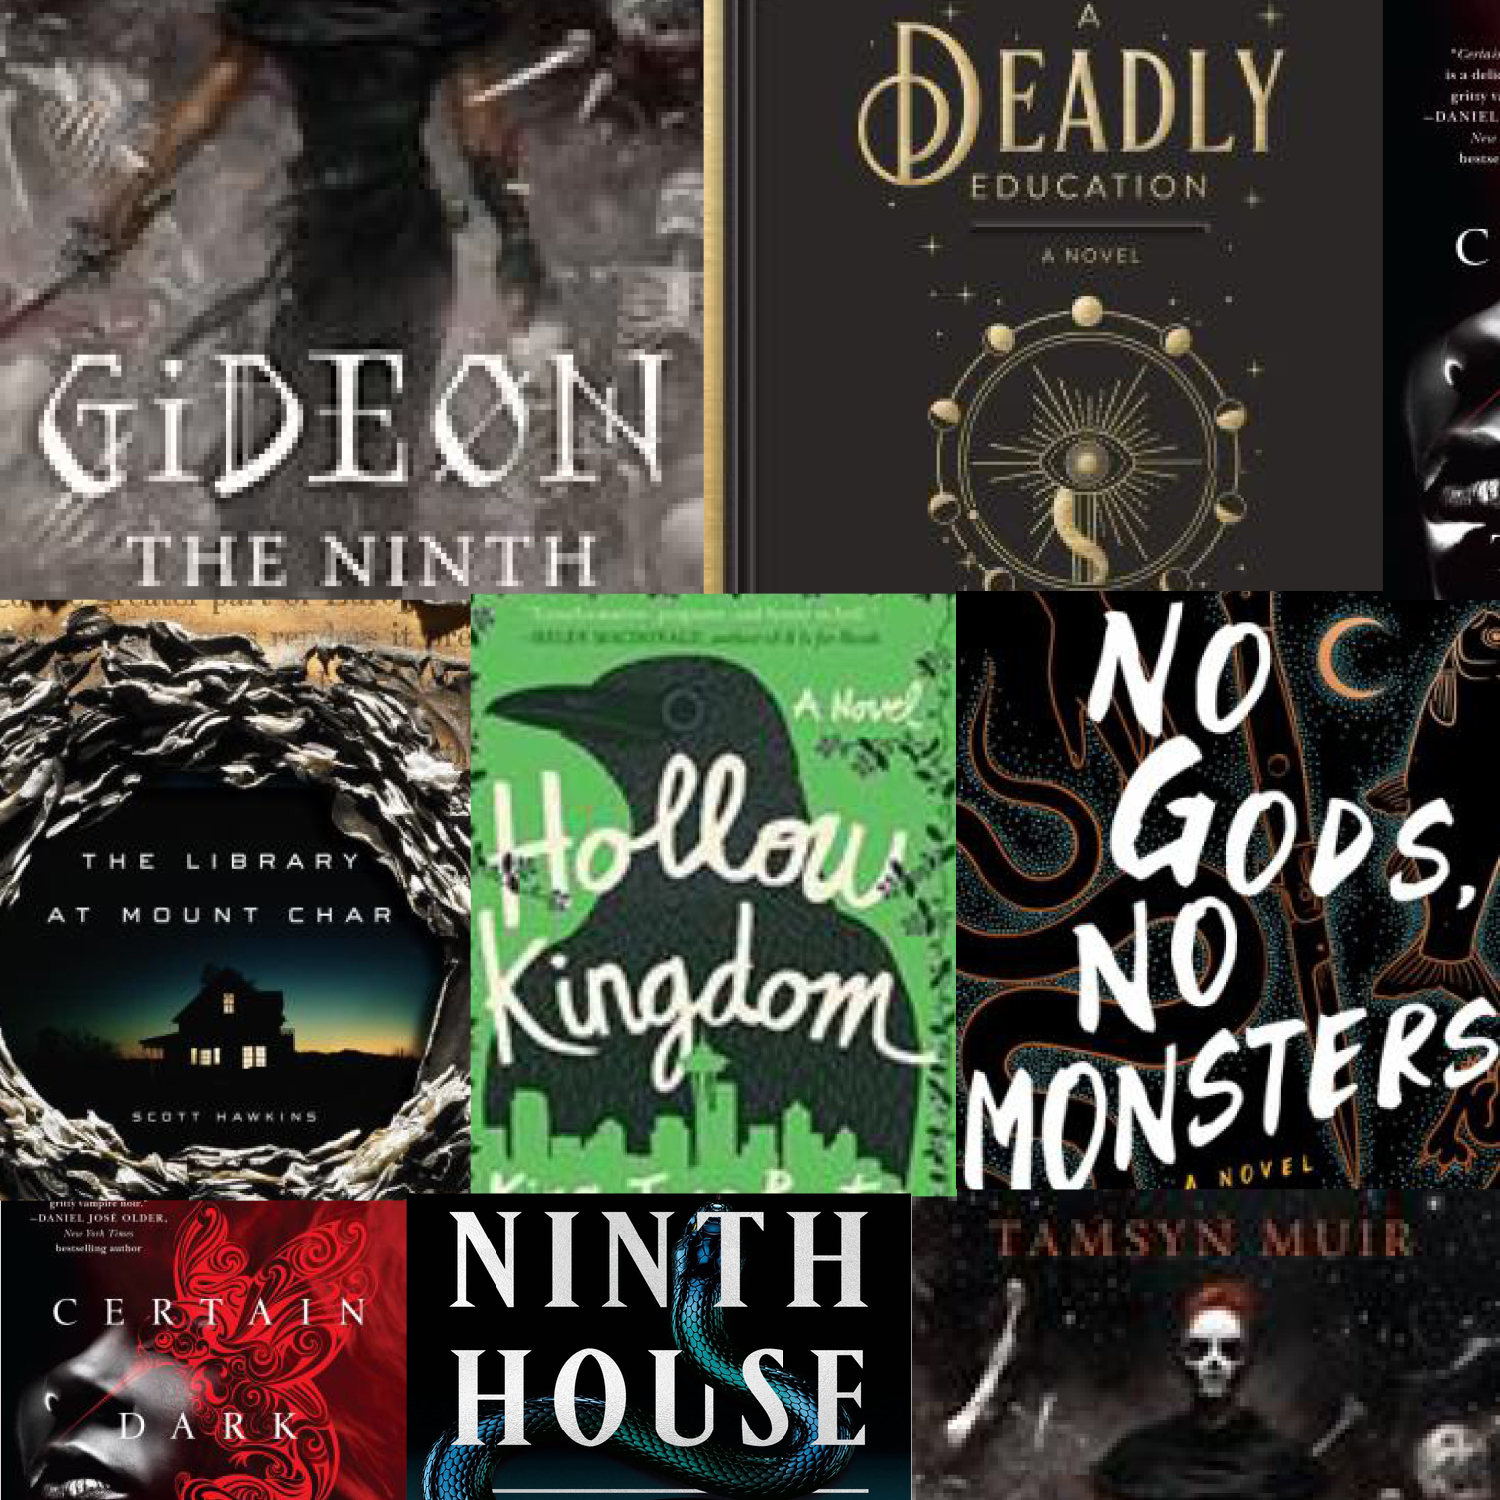 Halloween put you in the mood for a horror novel? Try these